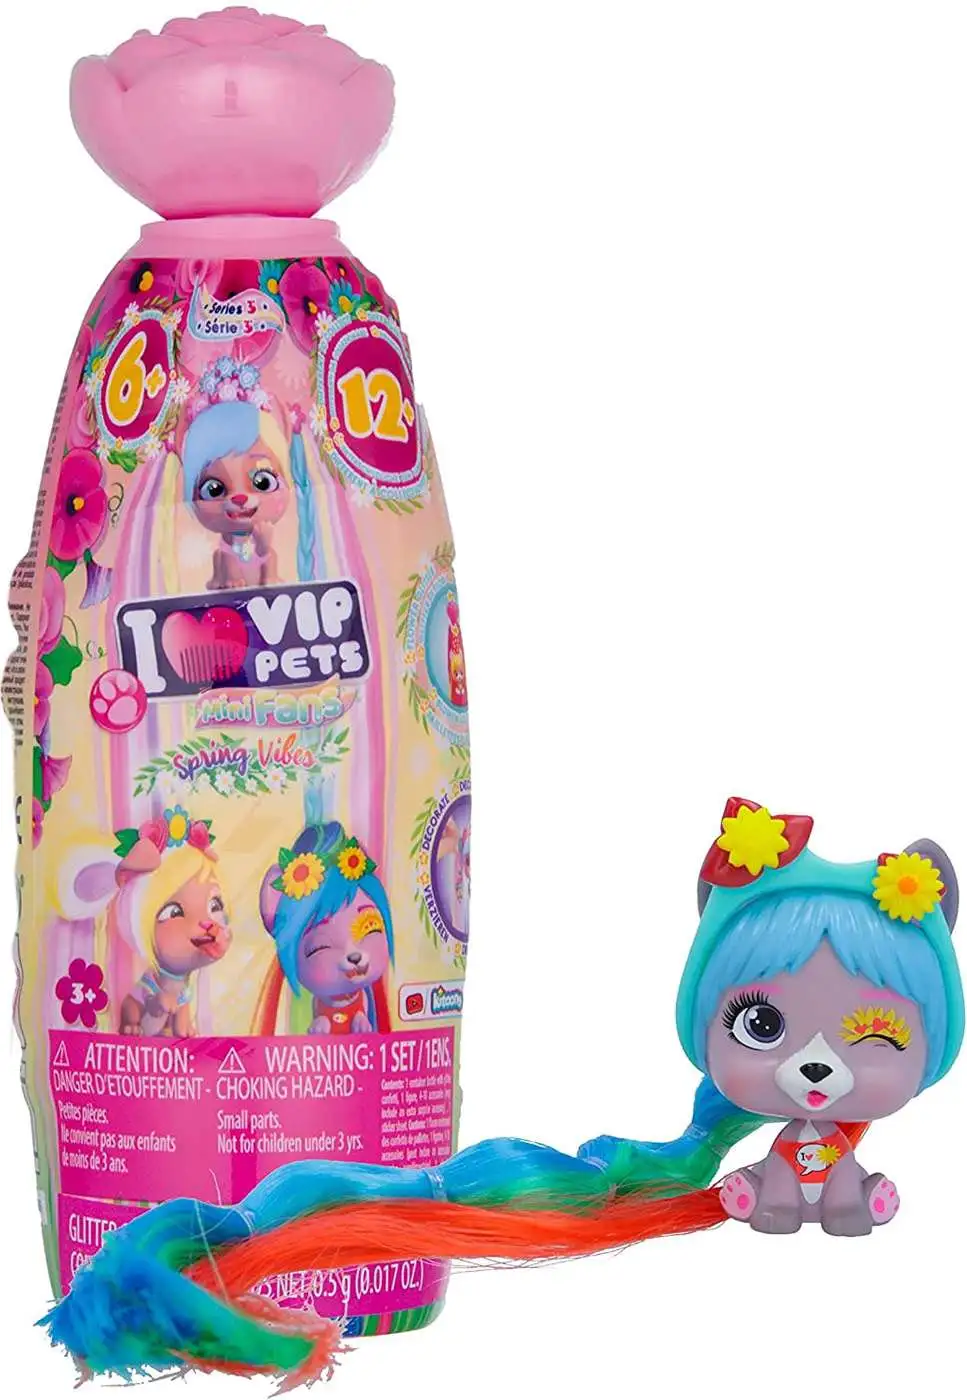 New VIP Pets Wash Away Boredom - The Toy Insider